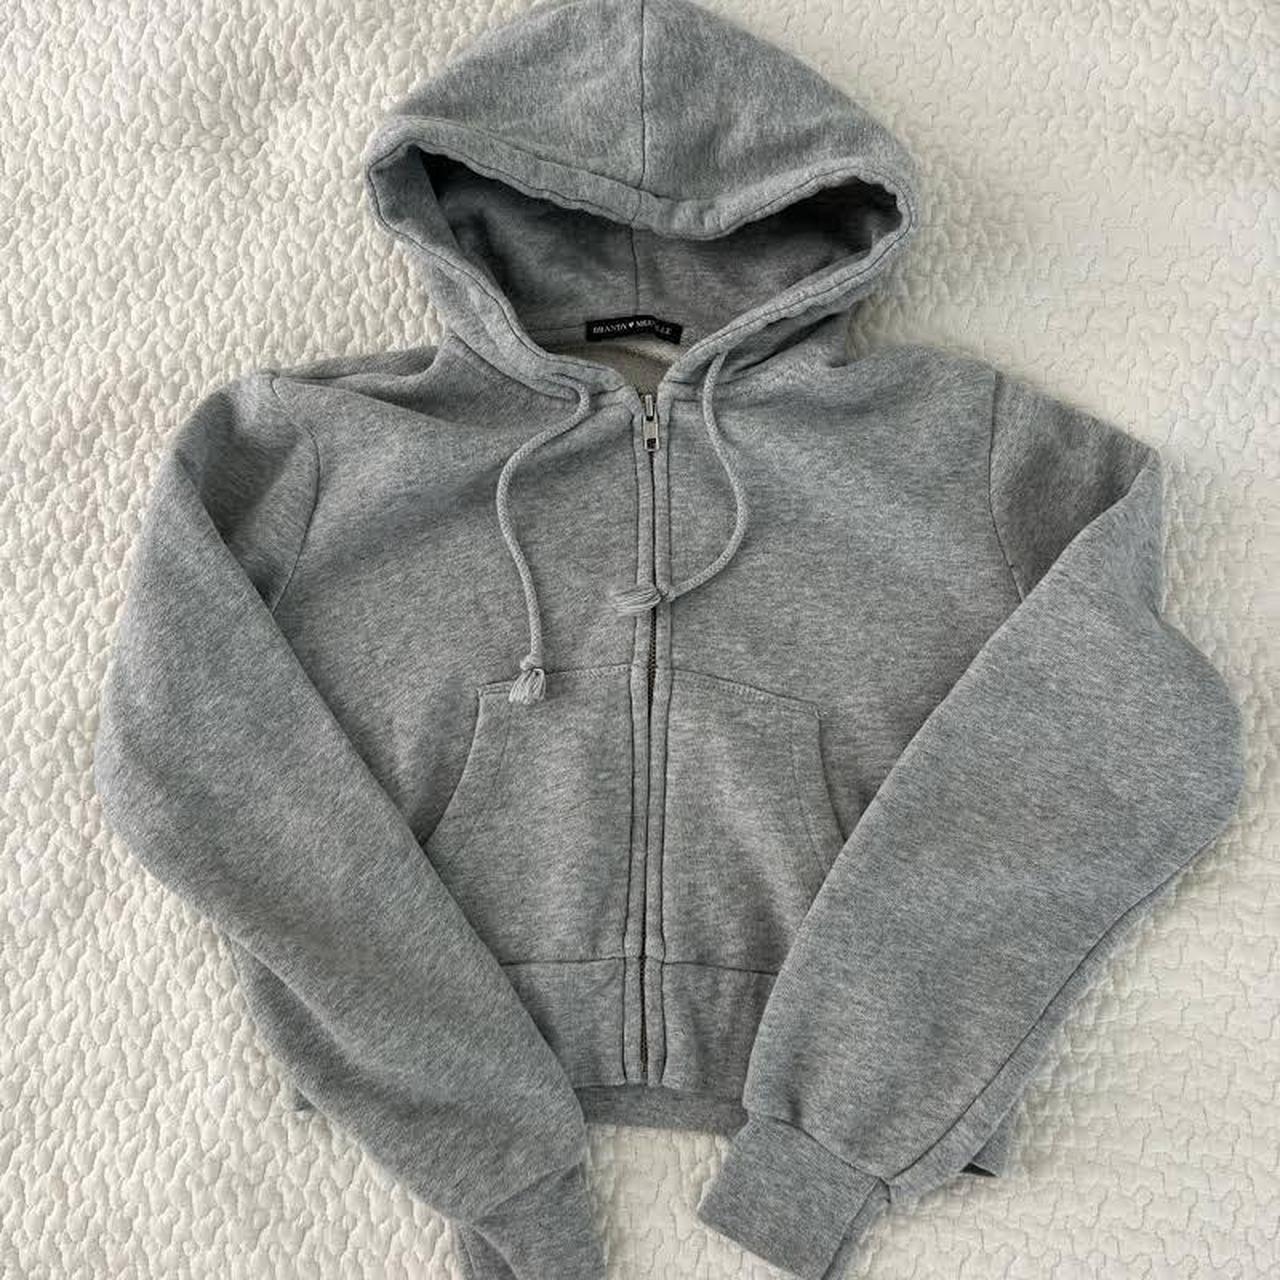  Cropped hoodie Women Zip up Solid Color Casual Workout